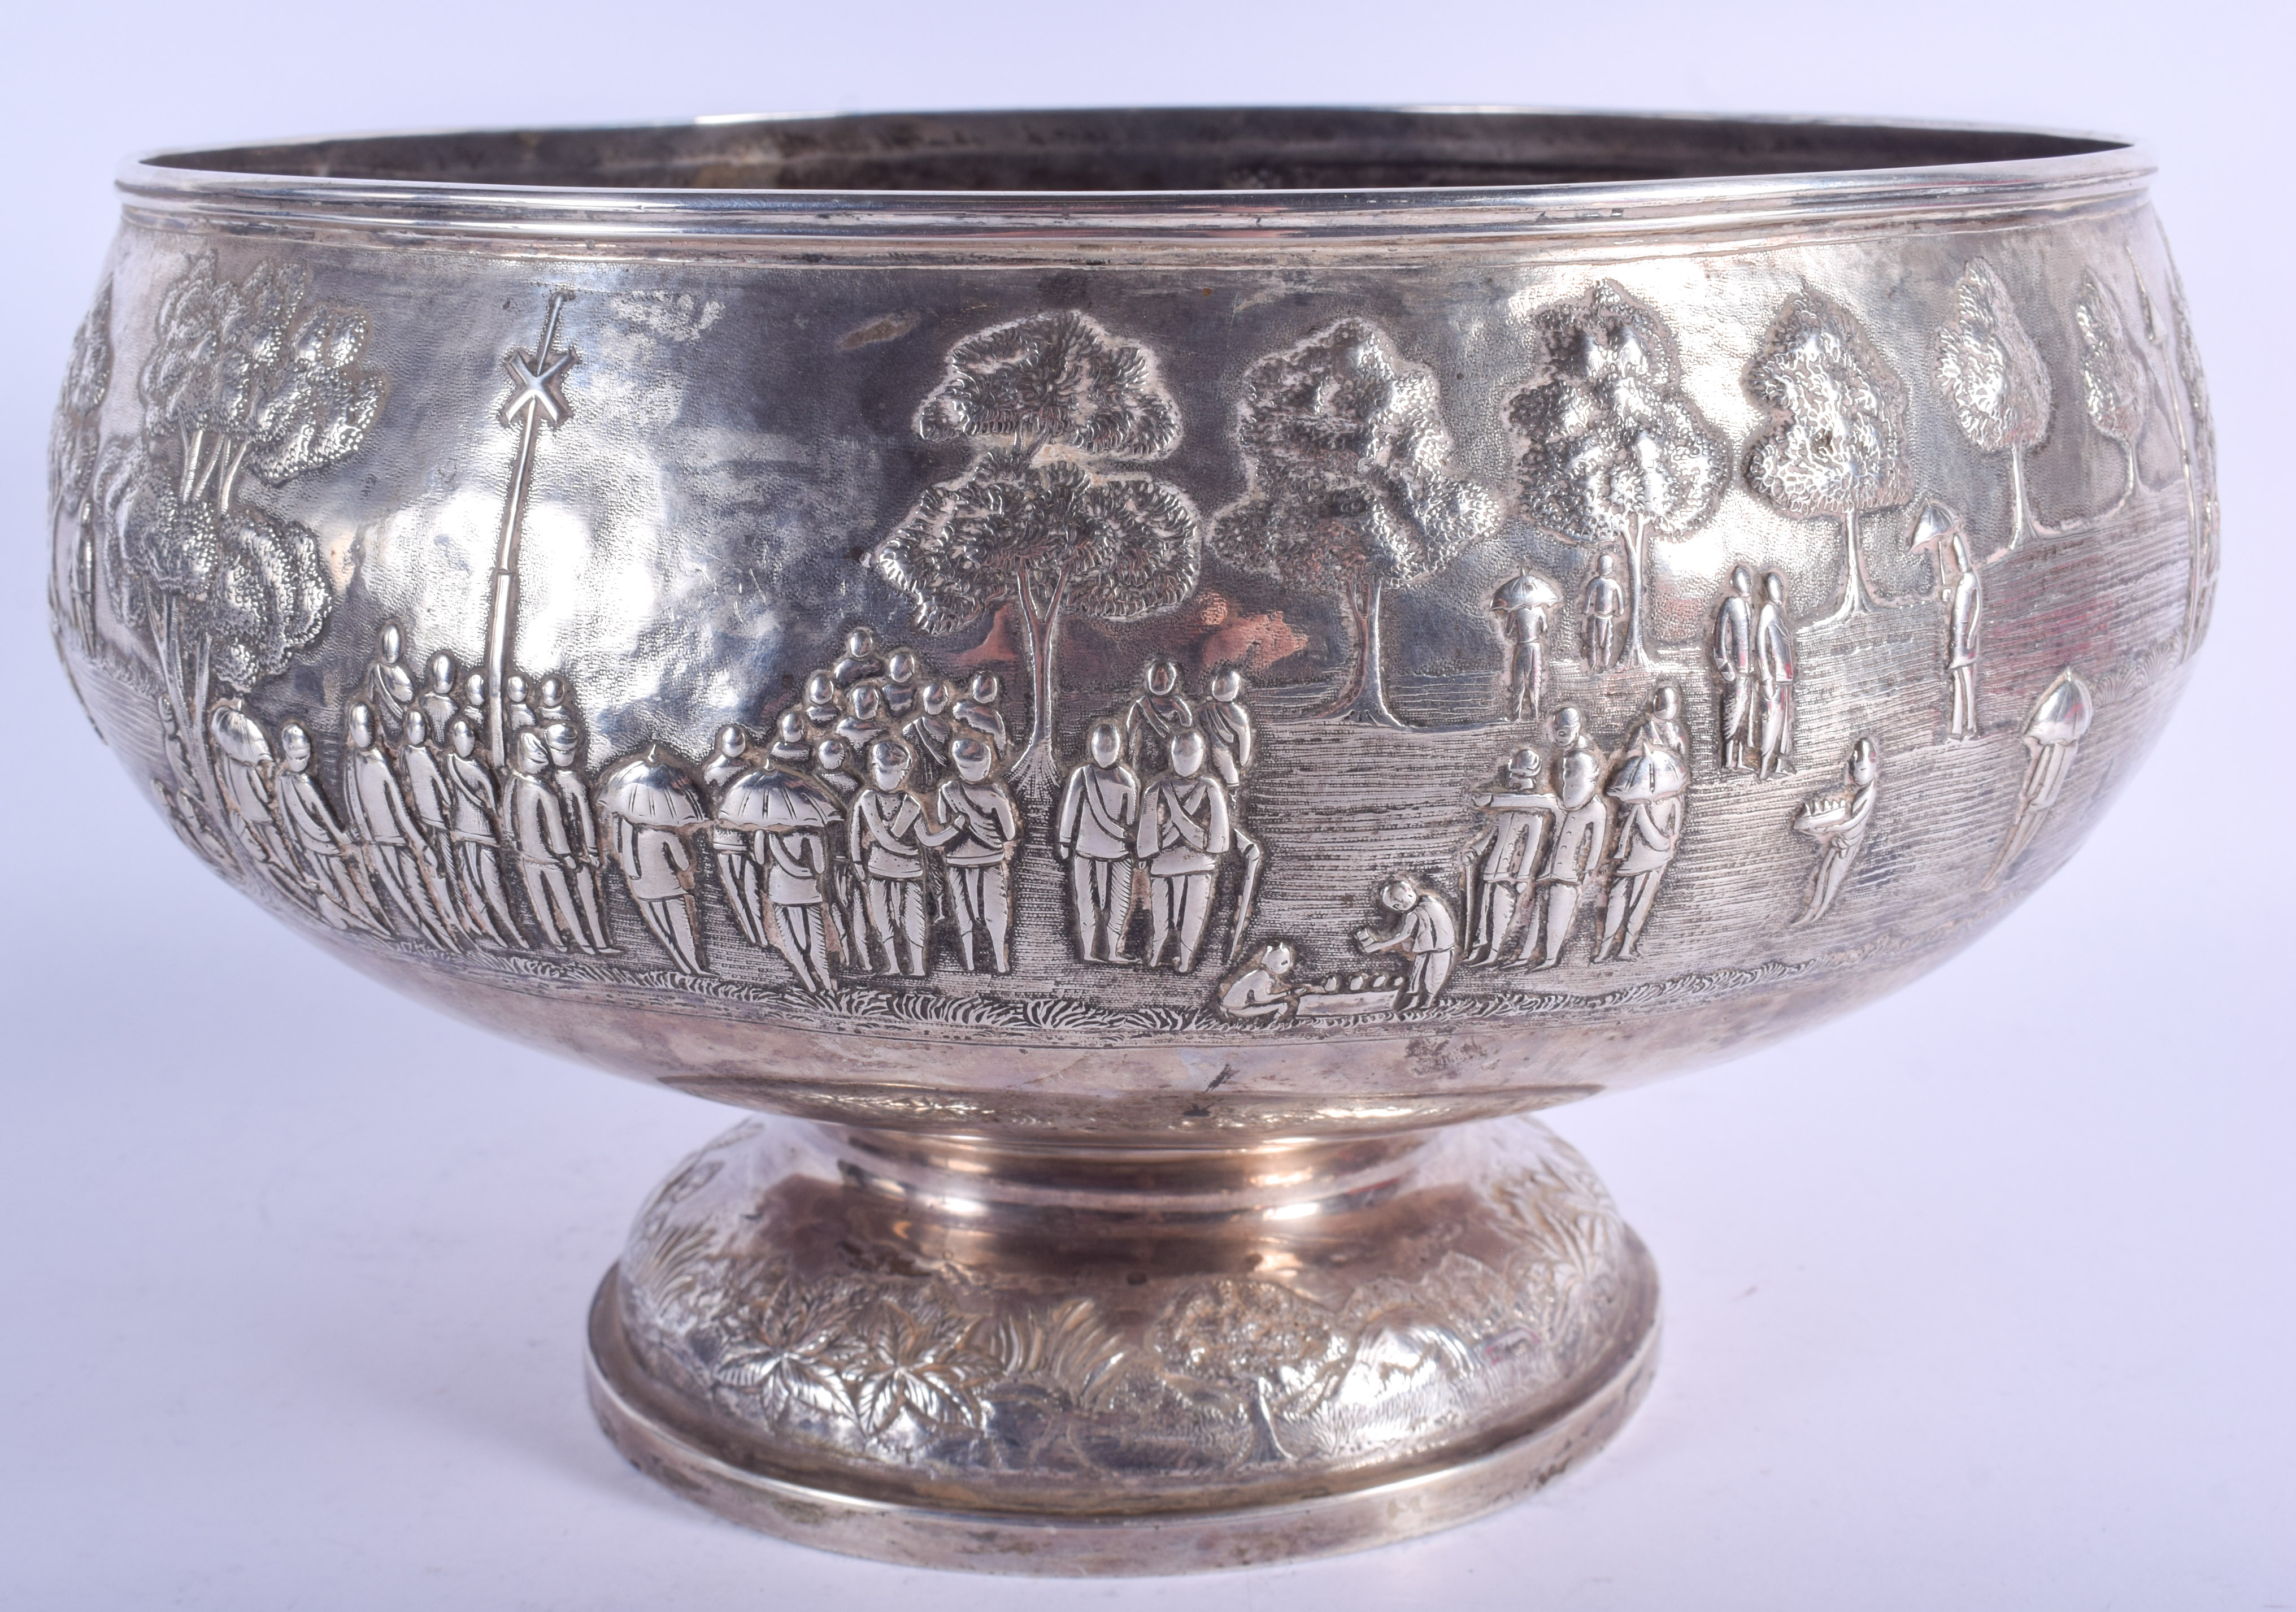 A GOOD 19TH CENTURY INDIAN COLONIAL KUTCH SILVER EMBOSSED BOWL decorated with figures within landsca - Image 3 of 6